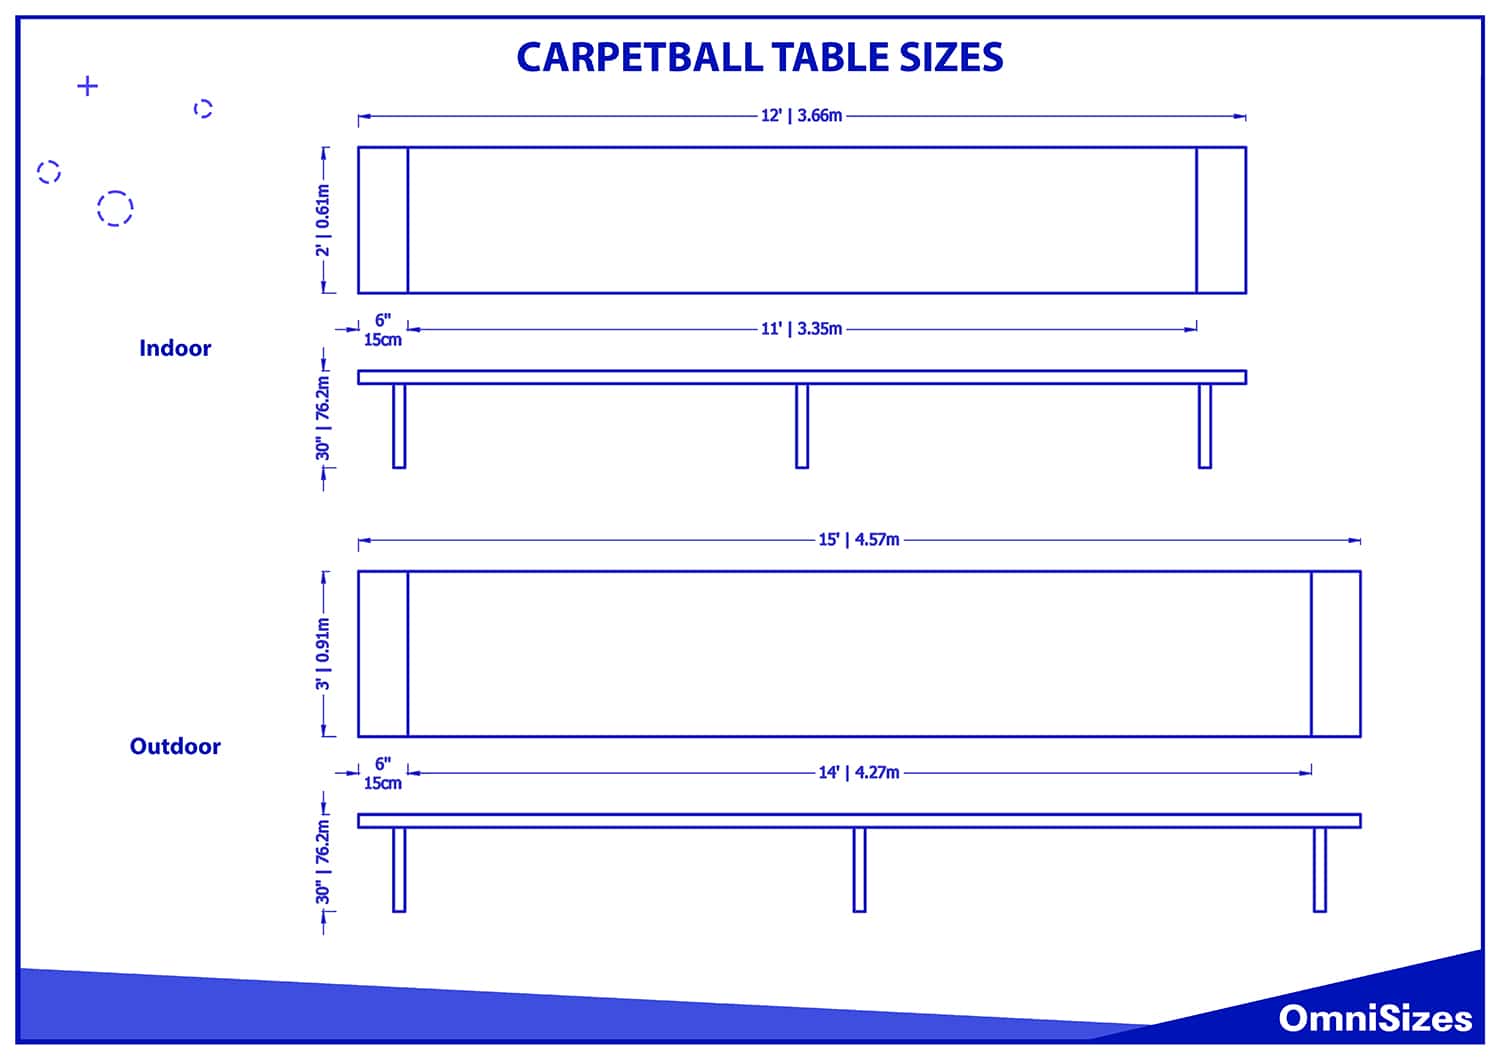 Carpetball table sizes